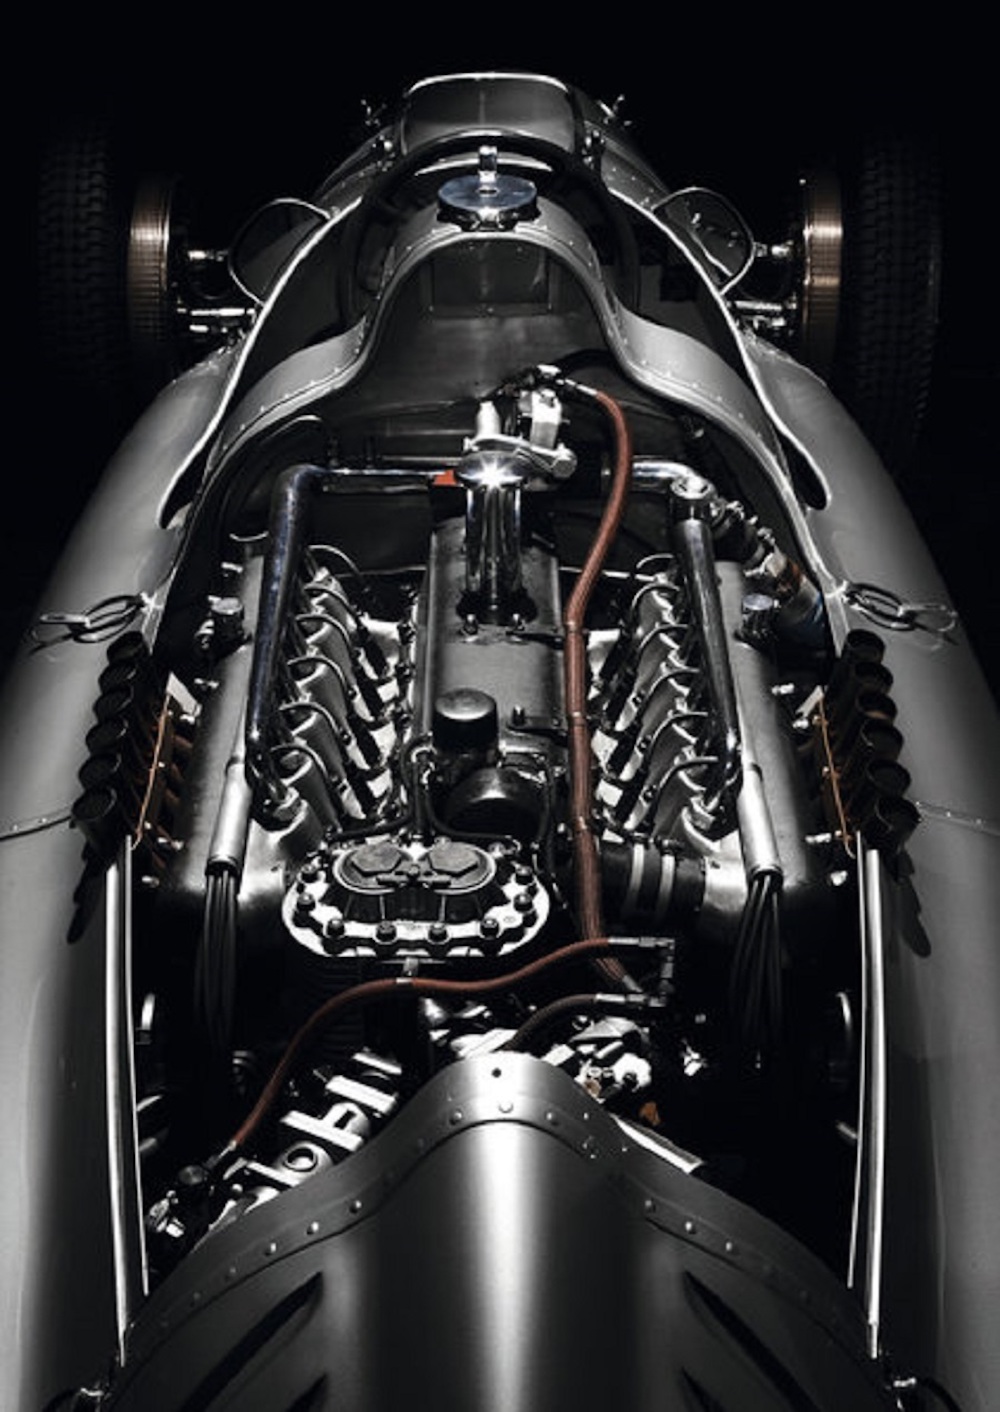 Auto Union Type D - the mightly V12 engine in the Type D had a 60-degree cylinder angle; the supercharger was mounted vertically behind it.